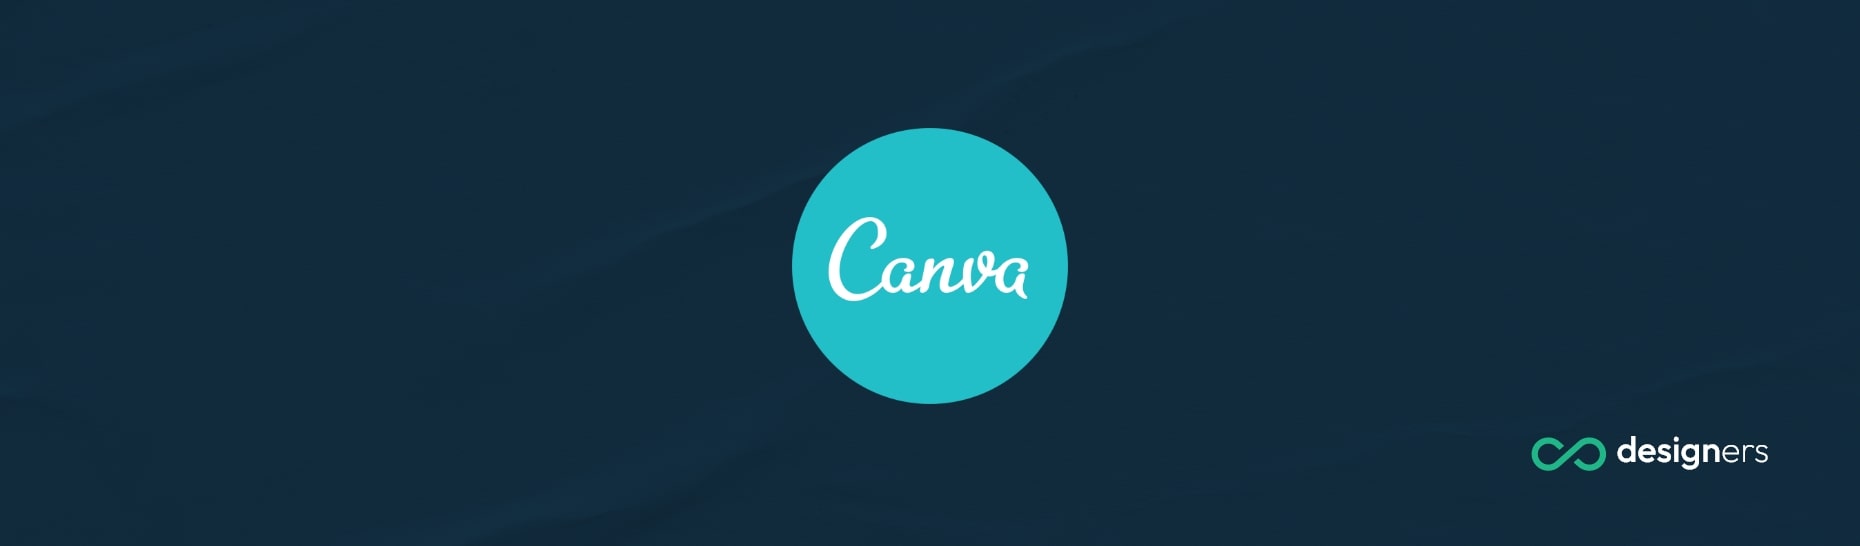 Can I Use Canva Music on YouTube?